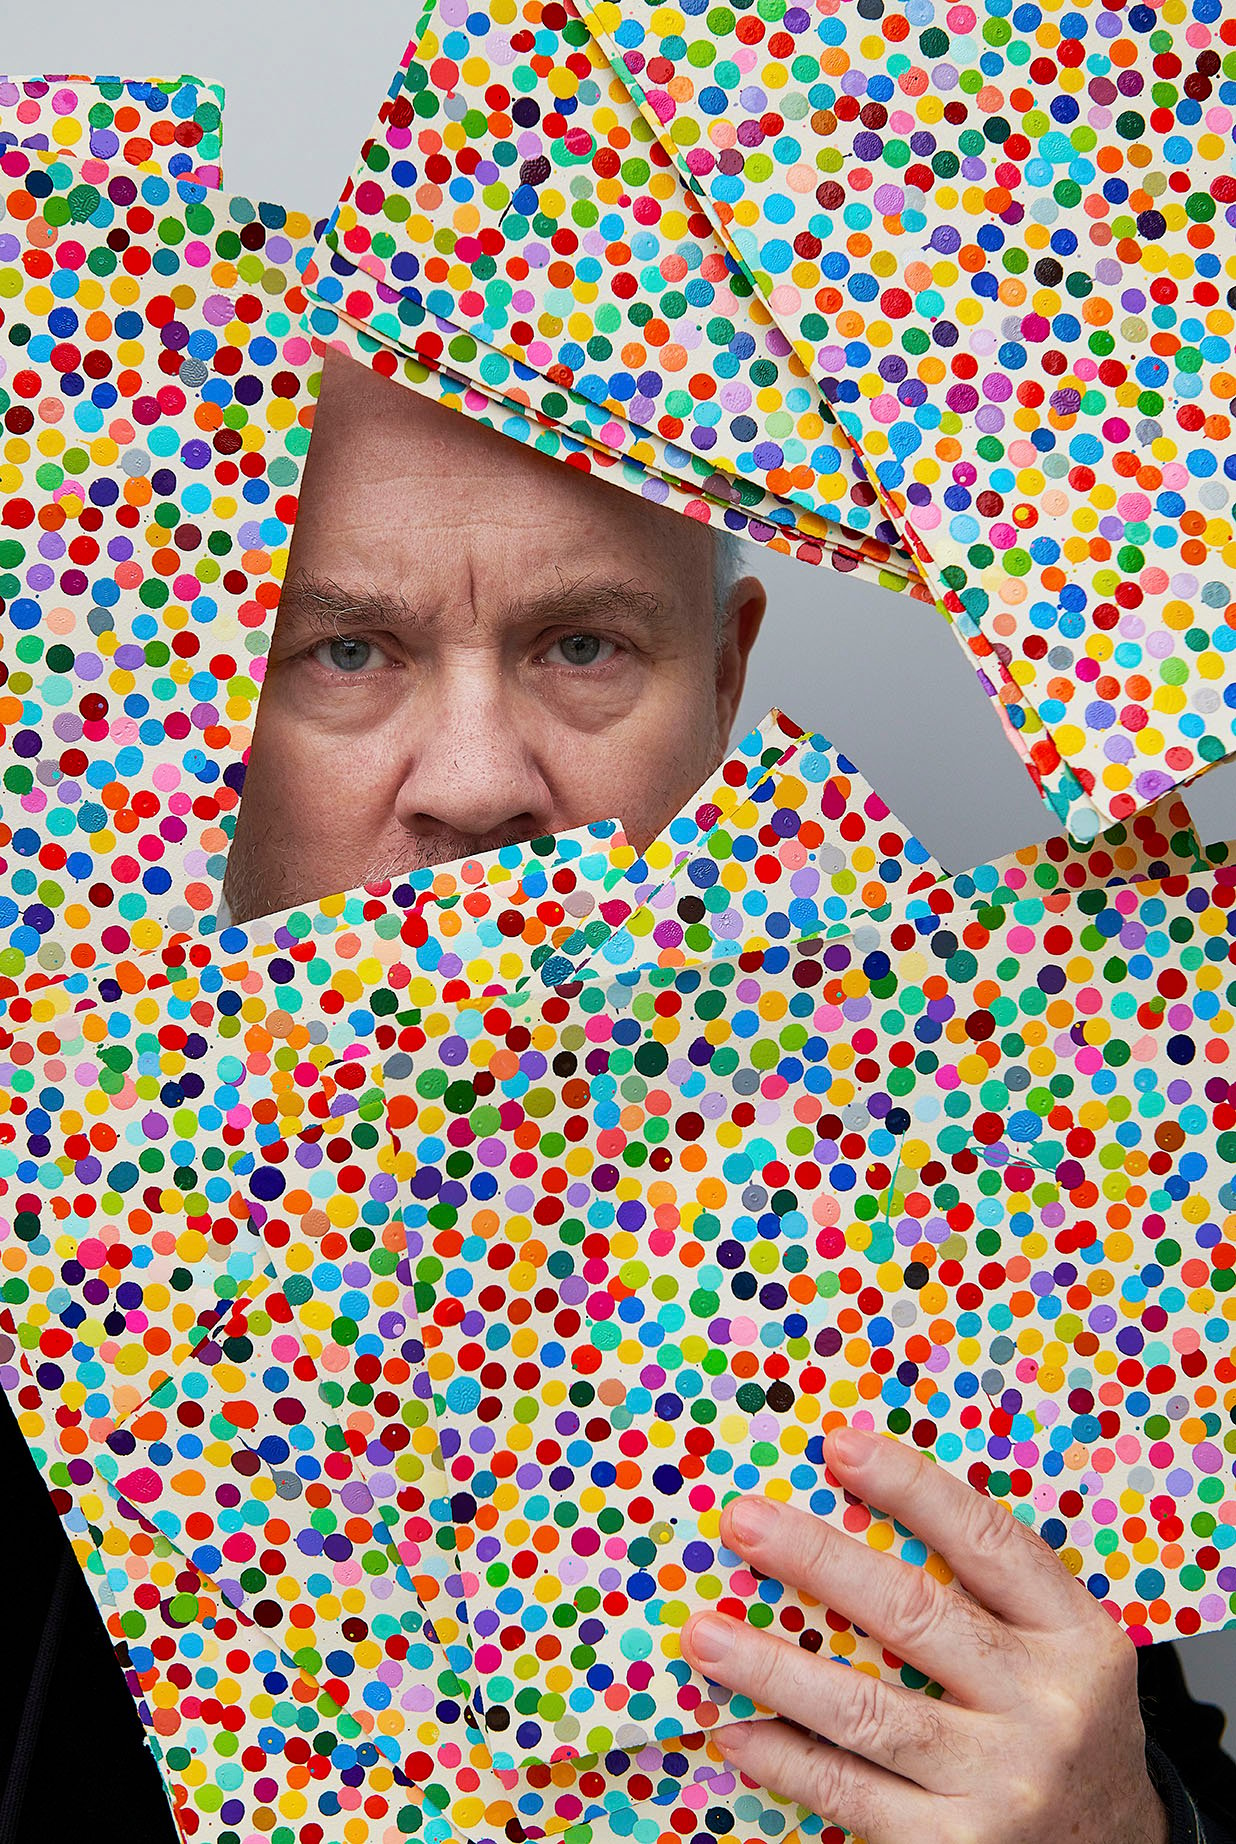 Damien Hirst Admits His Fans Are ‘a Cult’ as His First NFT Project Rakes in More Than $20 Million + Other Stories